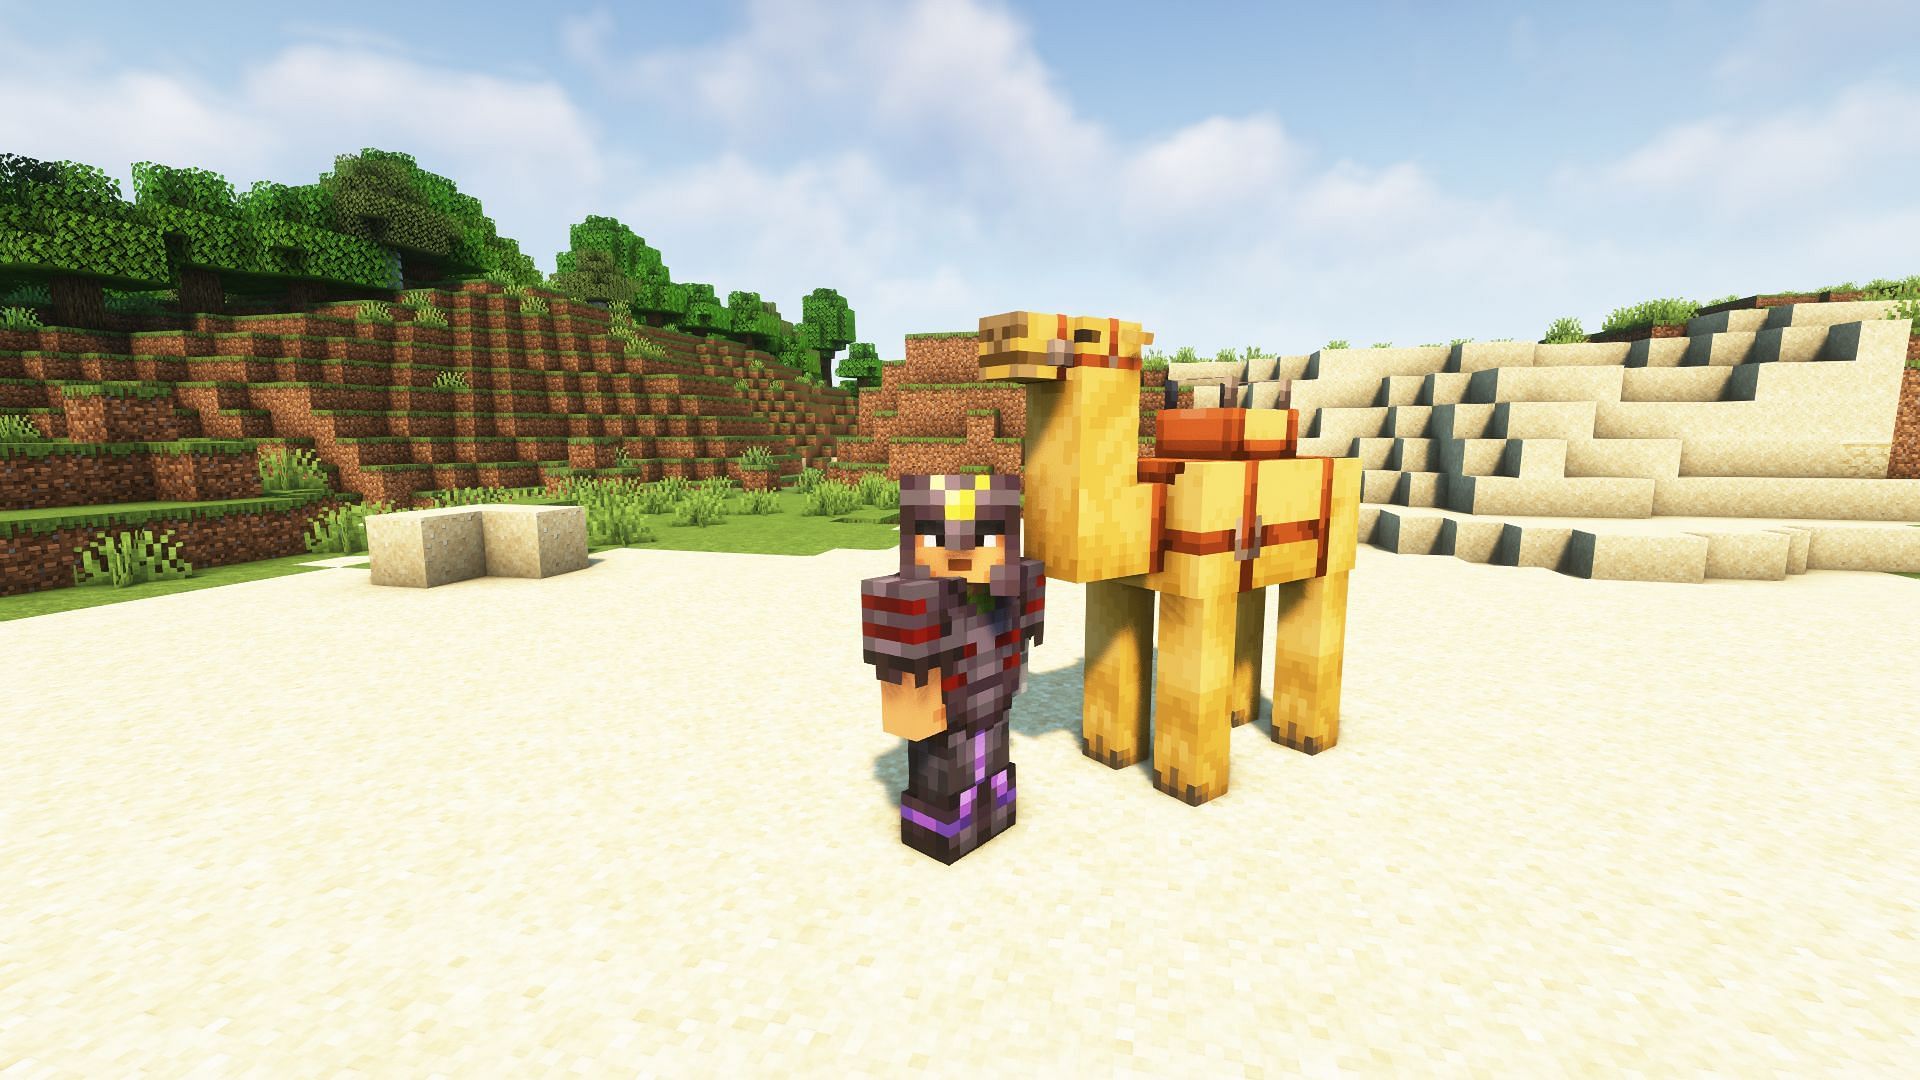 Armor trim and camel in snapshot 23w06a (Image via Mojang)